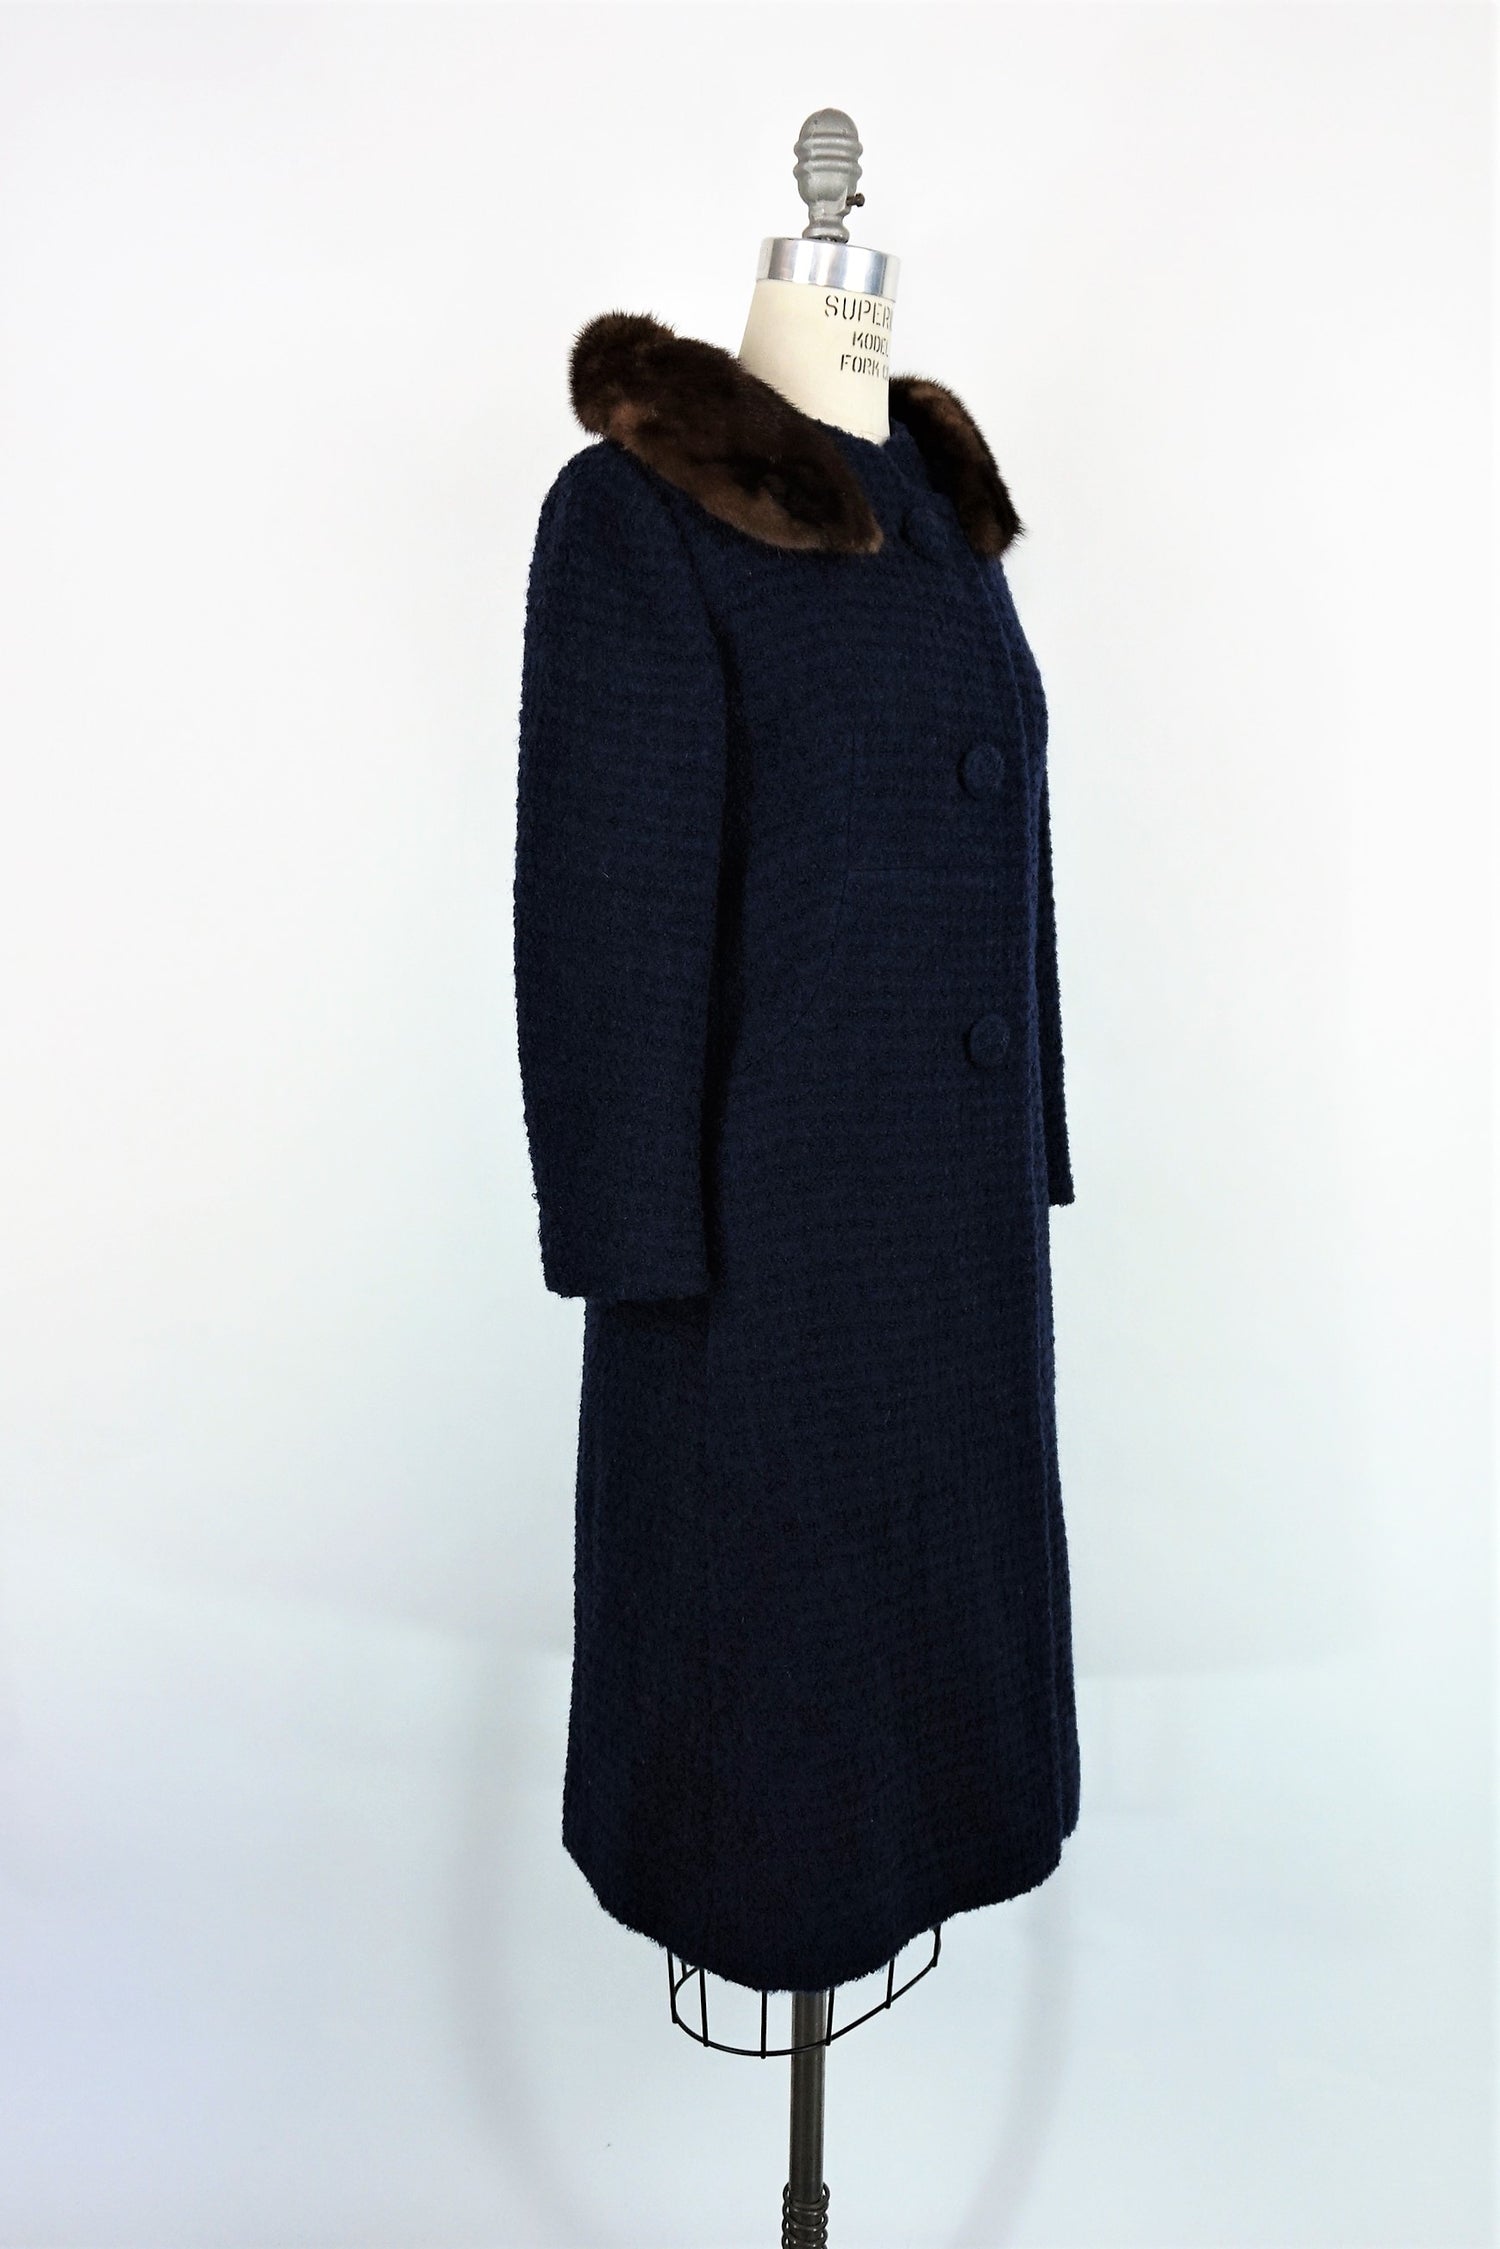 Vintage 1960s Navy Blue Wool Coat With Fur Collar